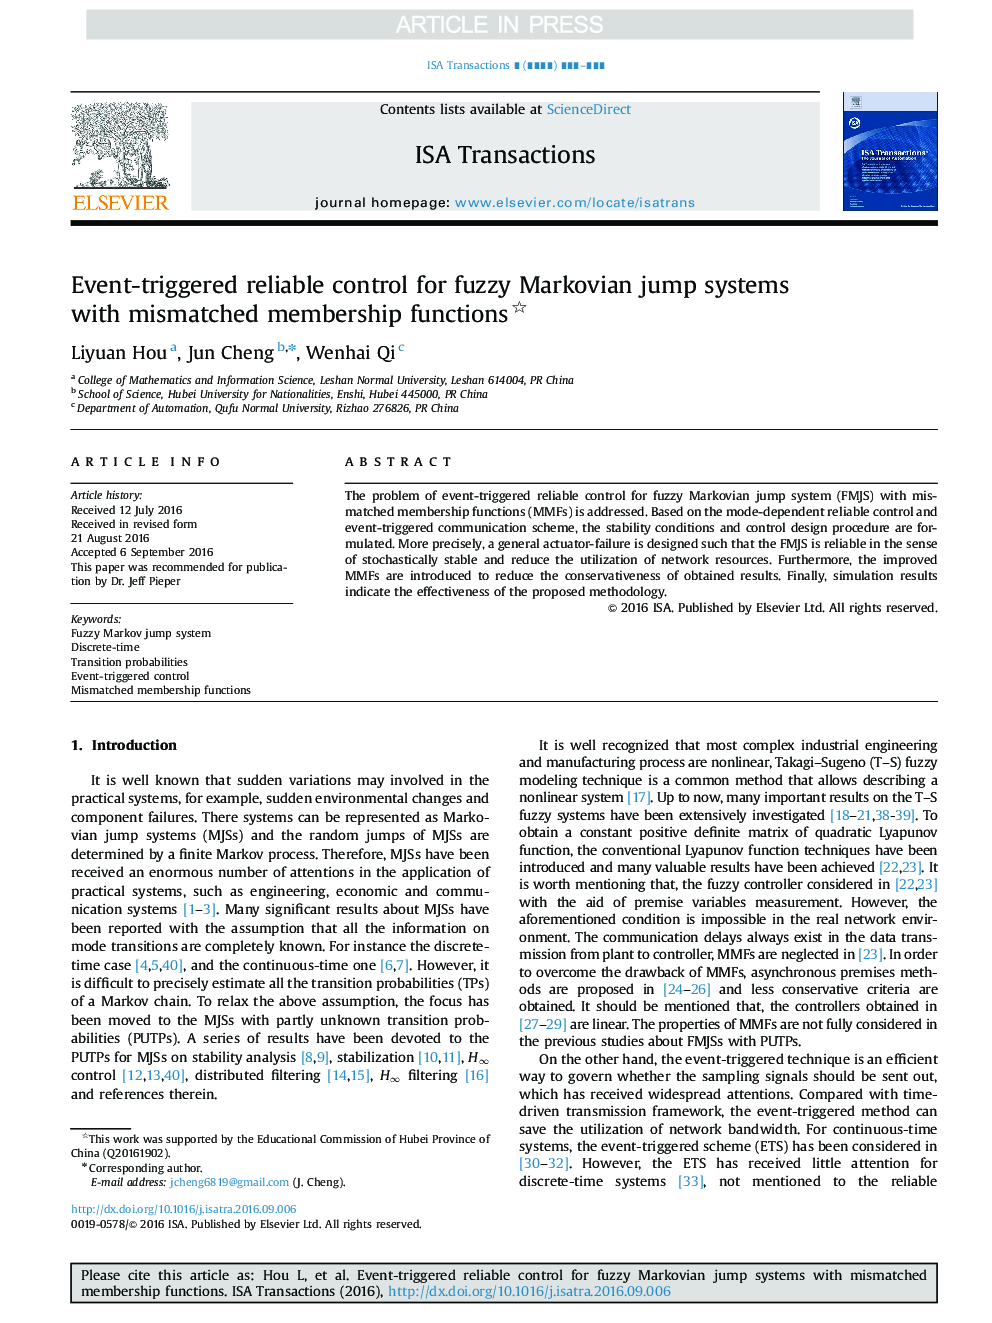 Event-triggered reliable control for fuzzy Markovian jump systems with mismatched membership functions